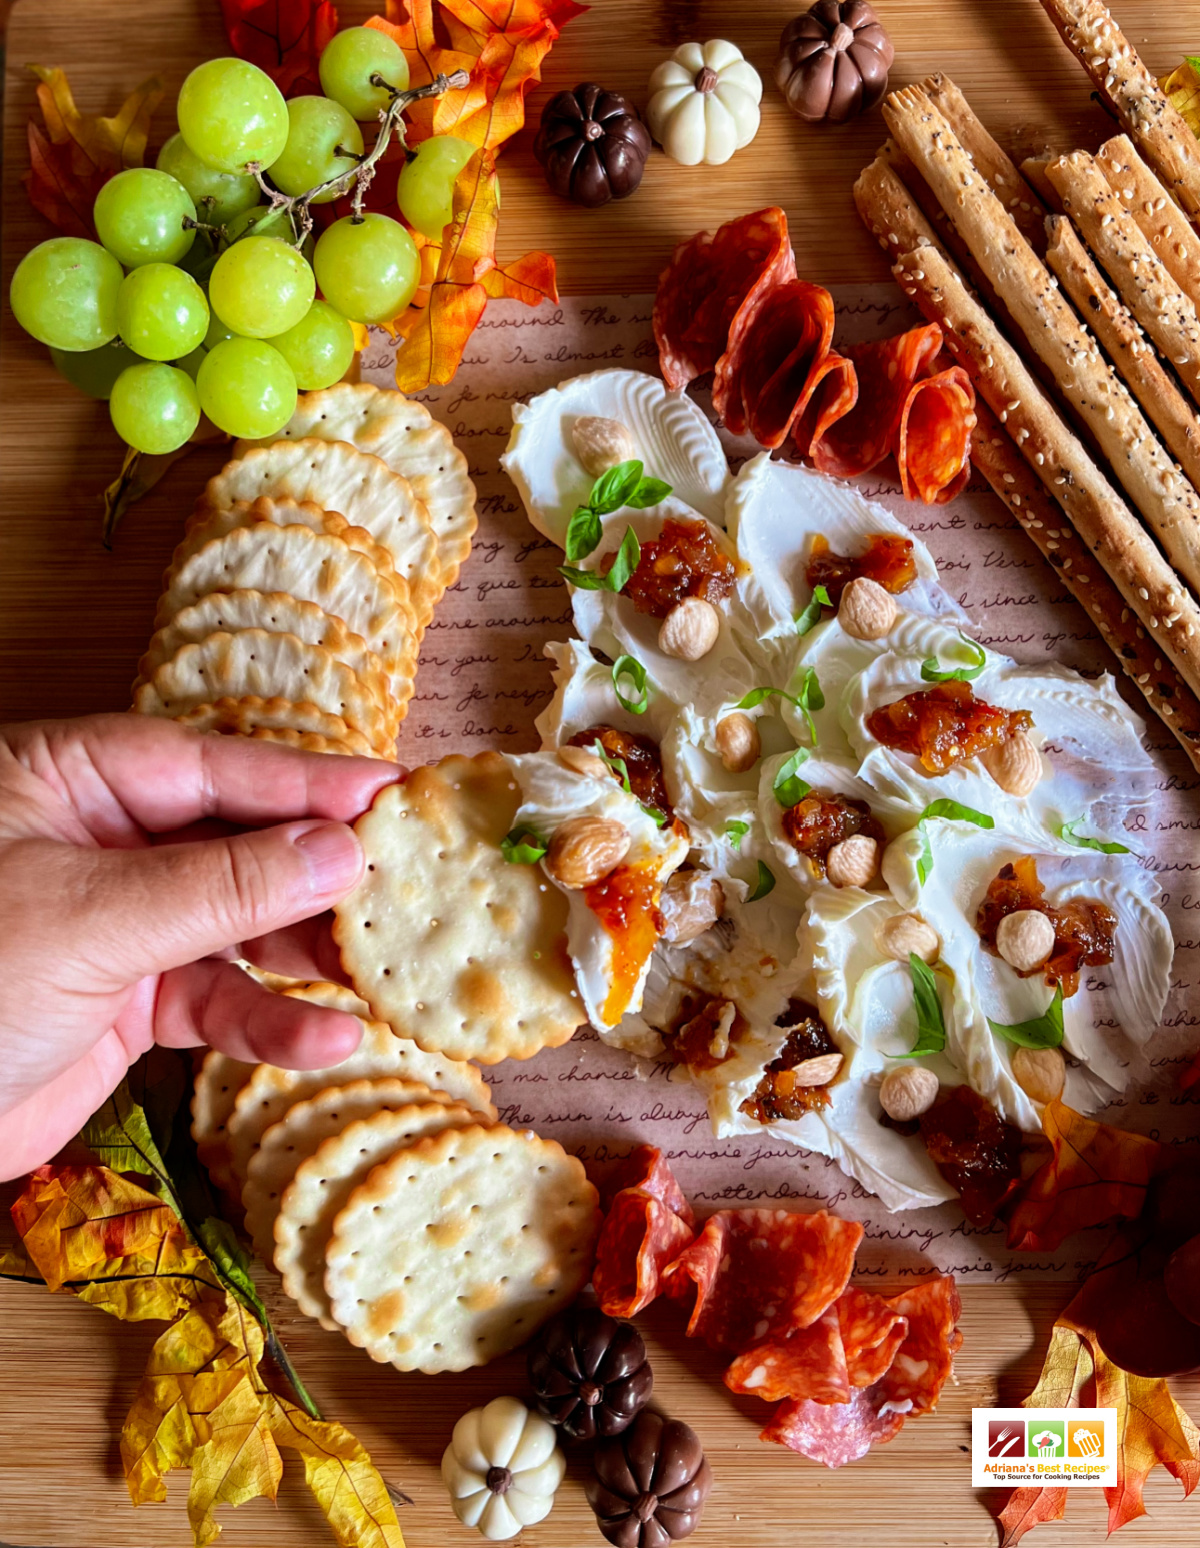 a hand holding a cracker with whipped cheese, chutney and almonds